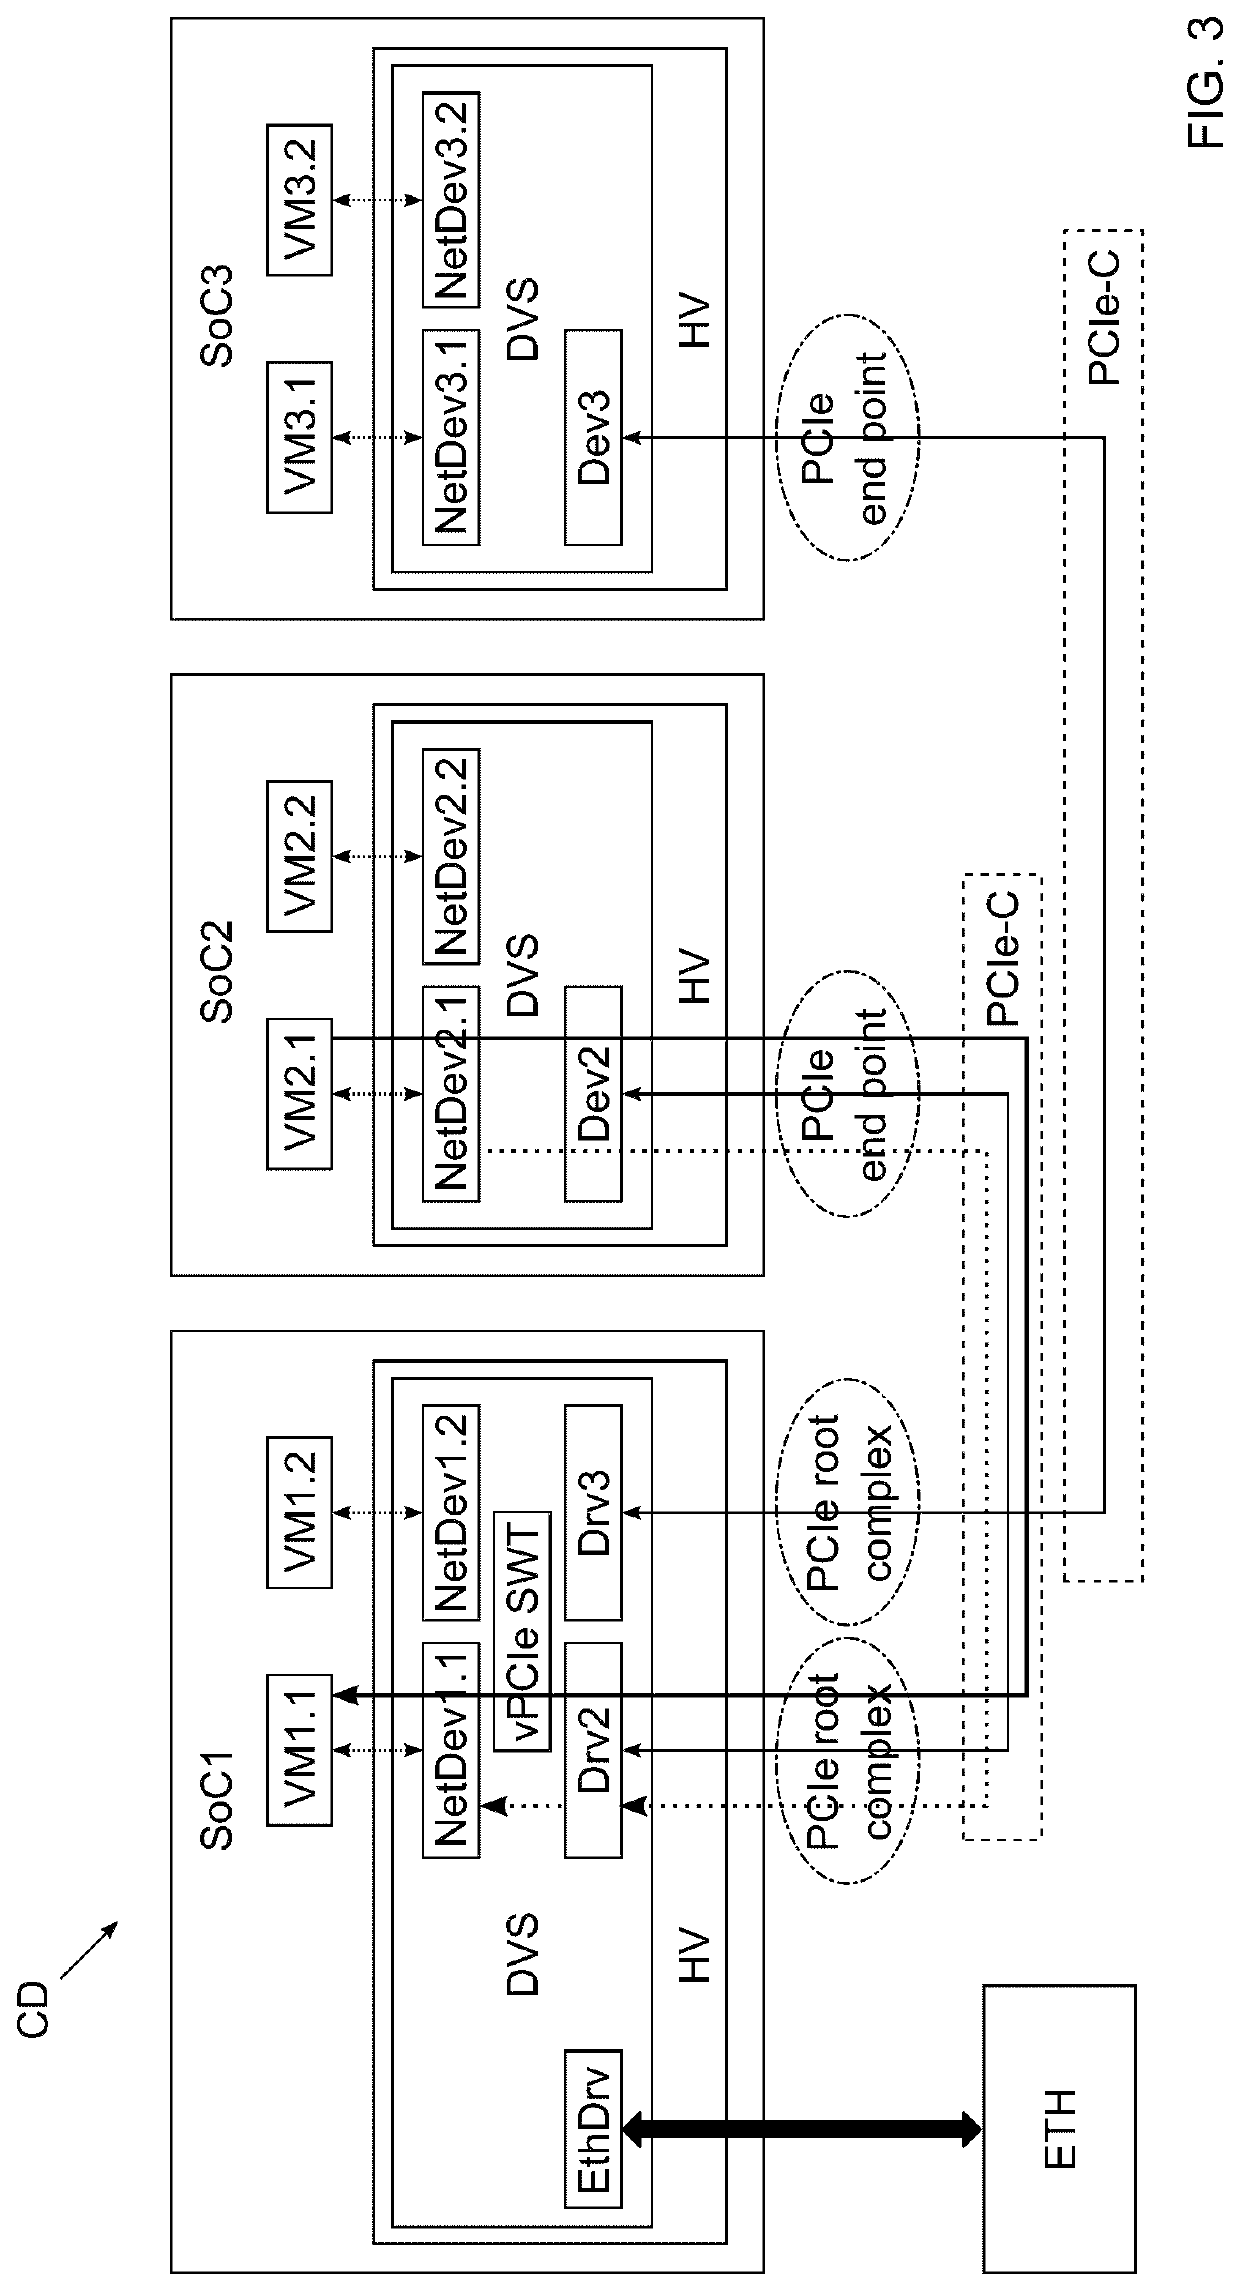 Computing device with ethernet connectivity for virtual machines on several systems on a chip that are connected with point-to-point data links